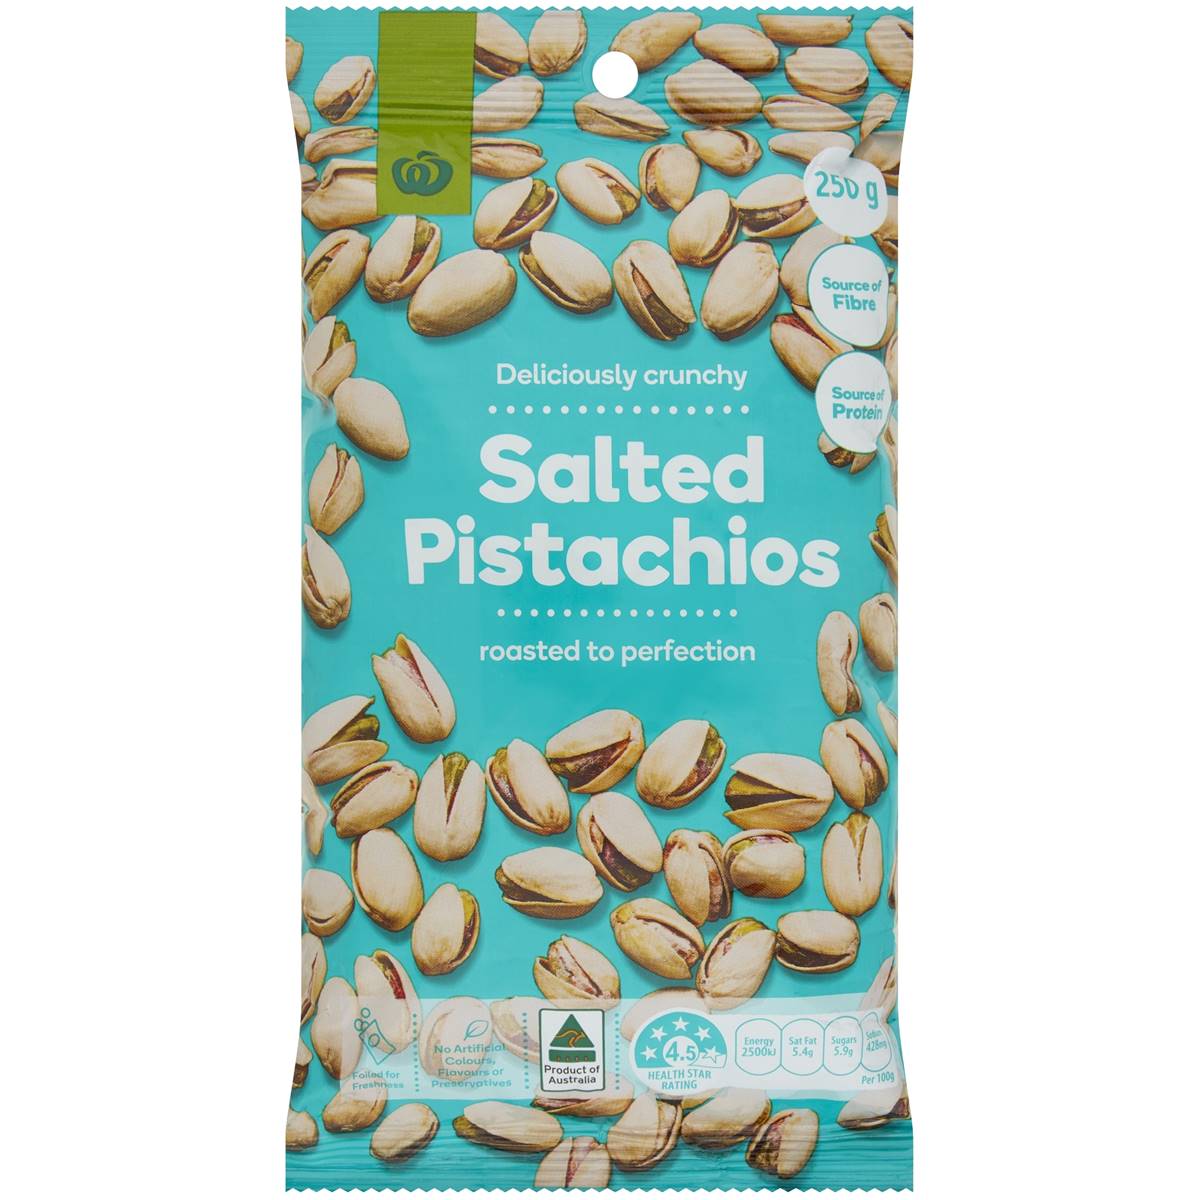 Calories in Woolworths Salted Pistachios